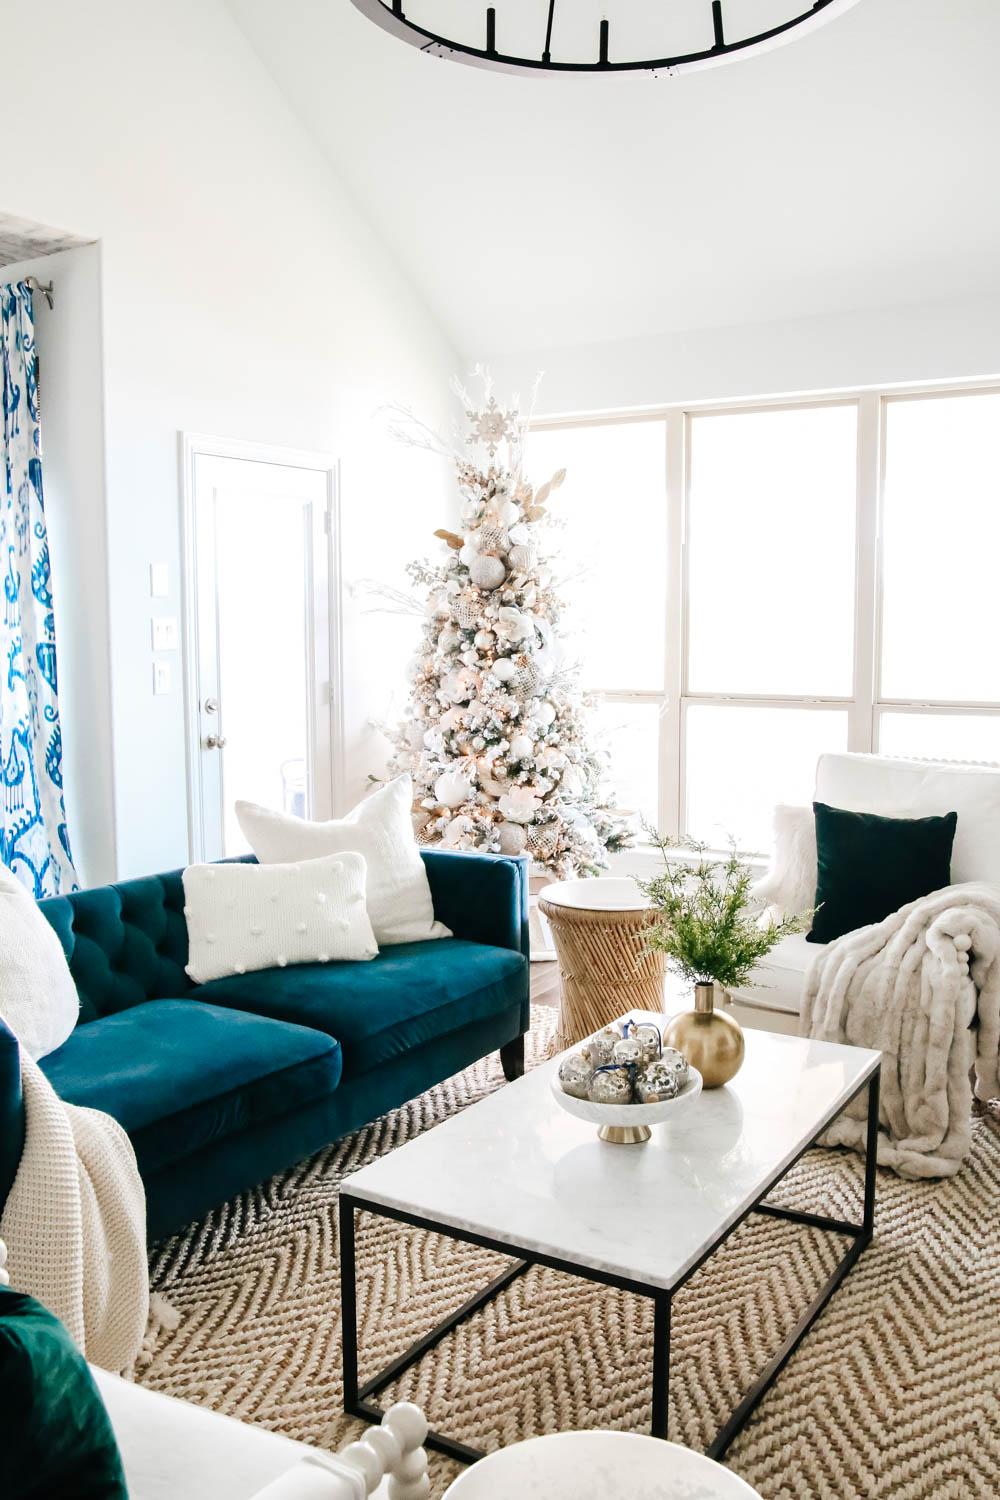 Soft holiday decor in this blue and white living room. #ABlissfulNest #Christmasdecor #holidaydecor